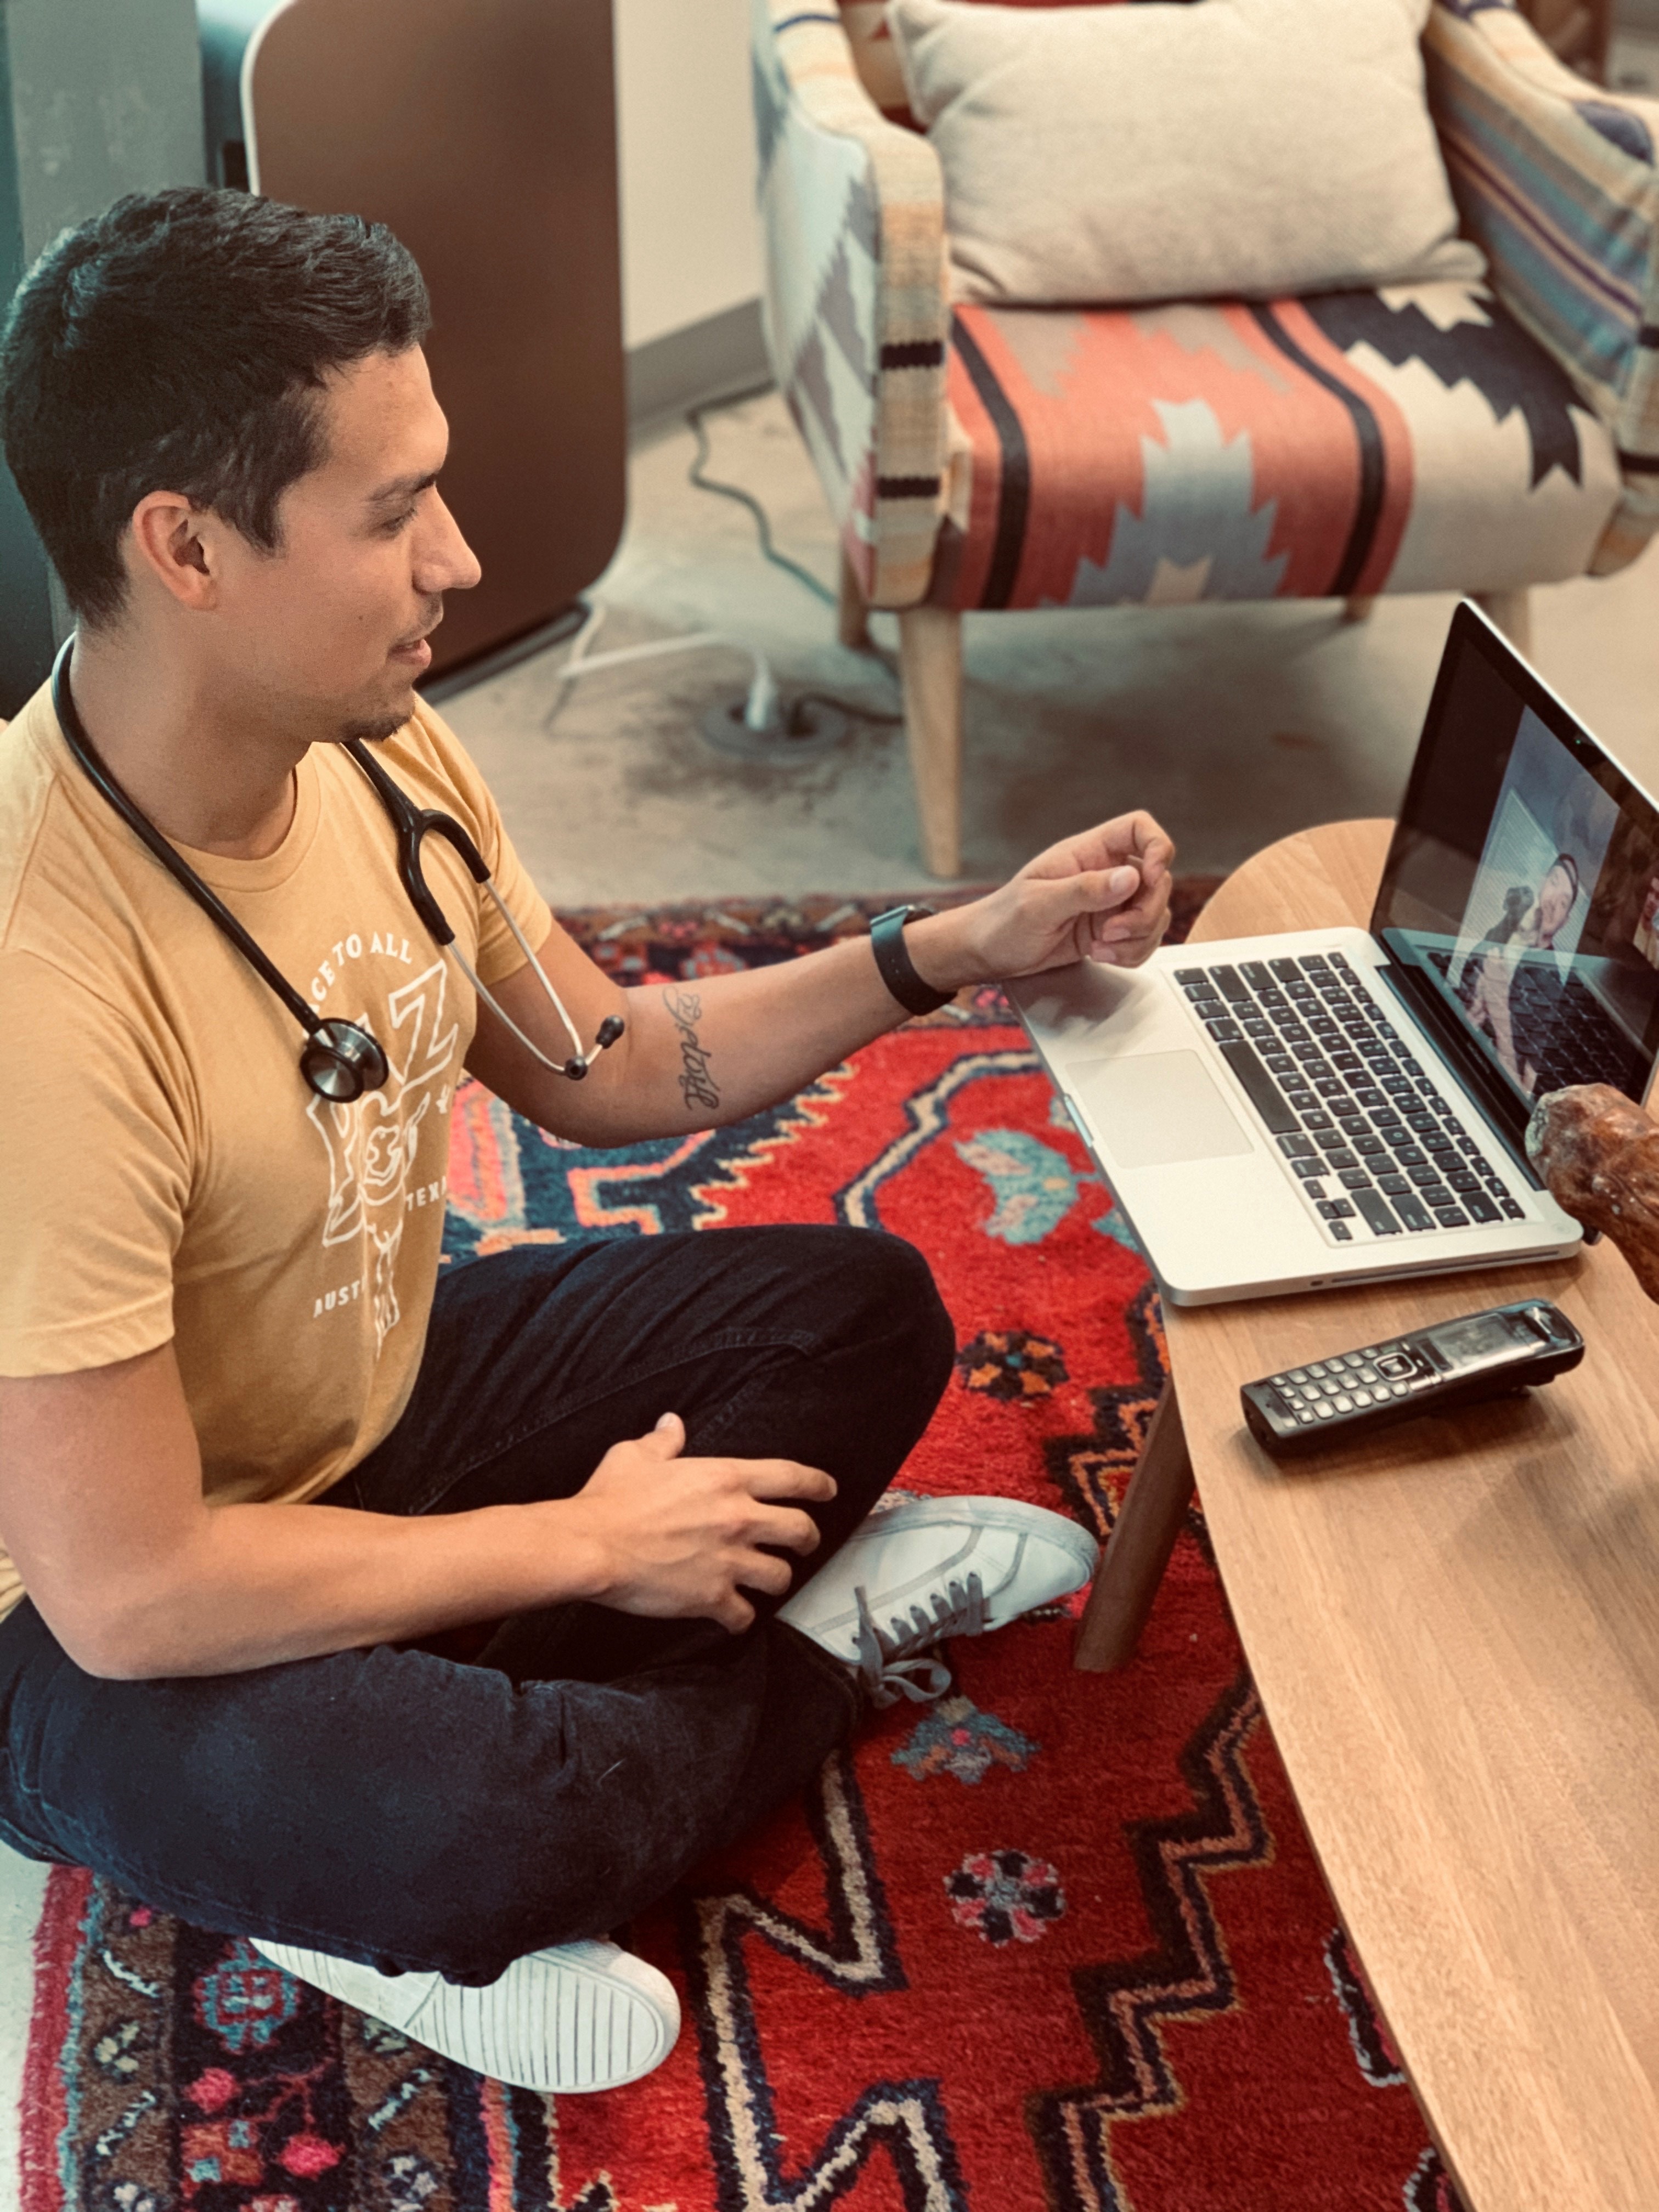 PAZ Veterinary employee, Jimmy L. uses telemedicine to connect with pet owners.